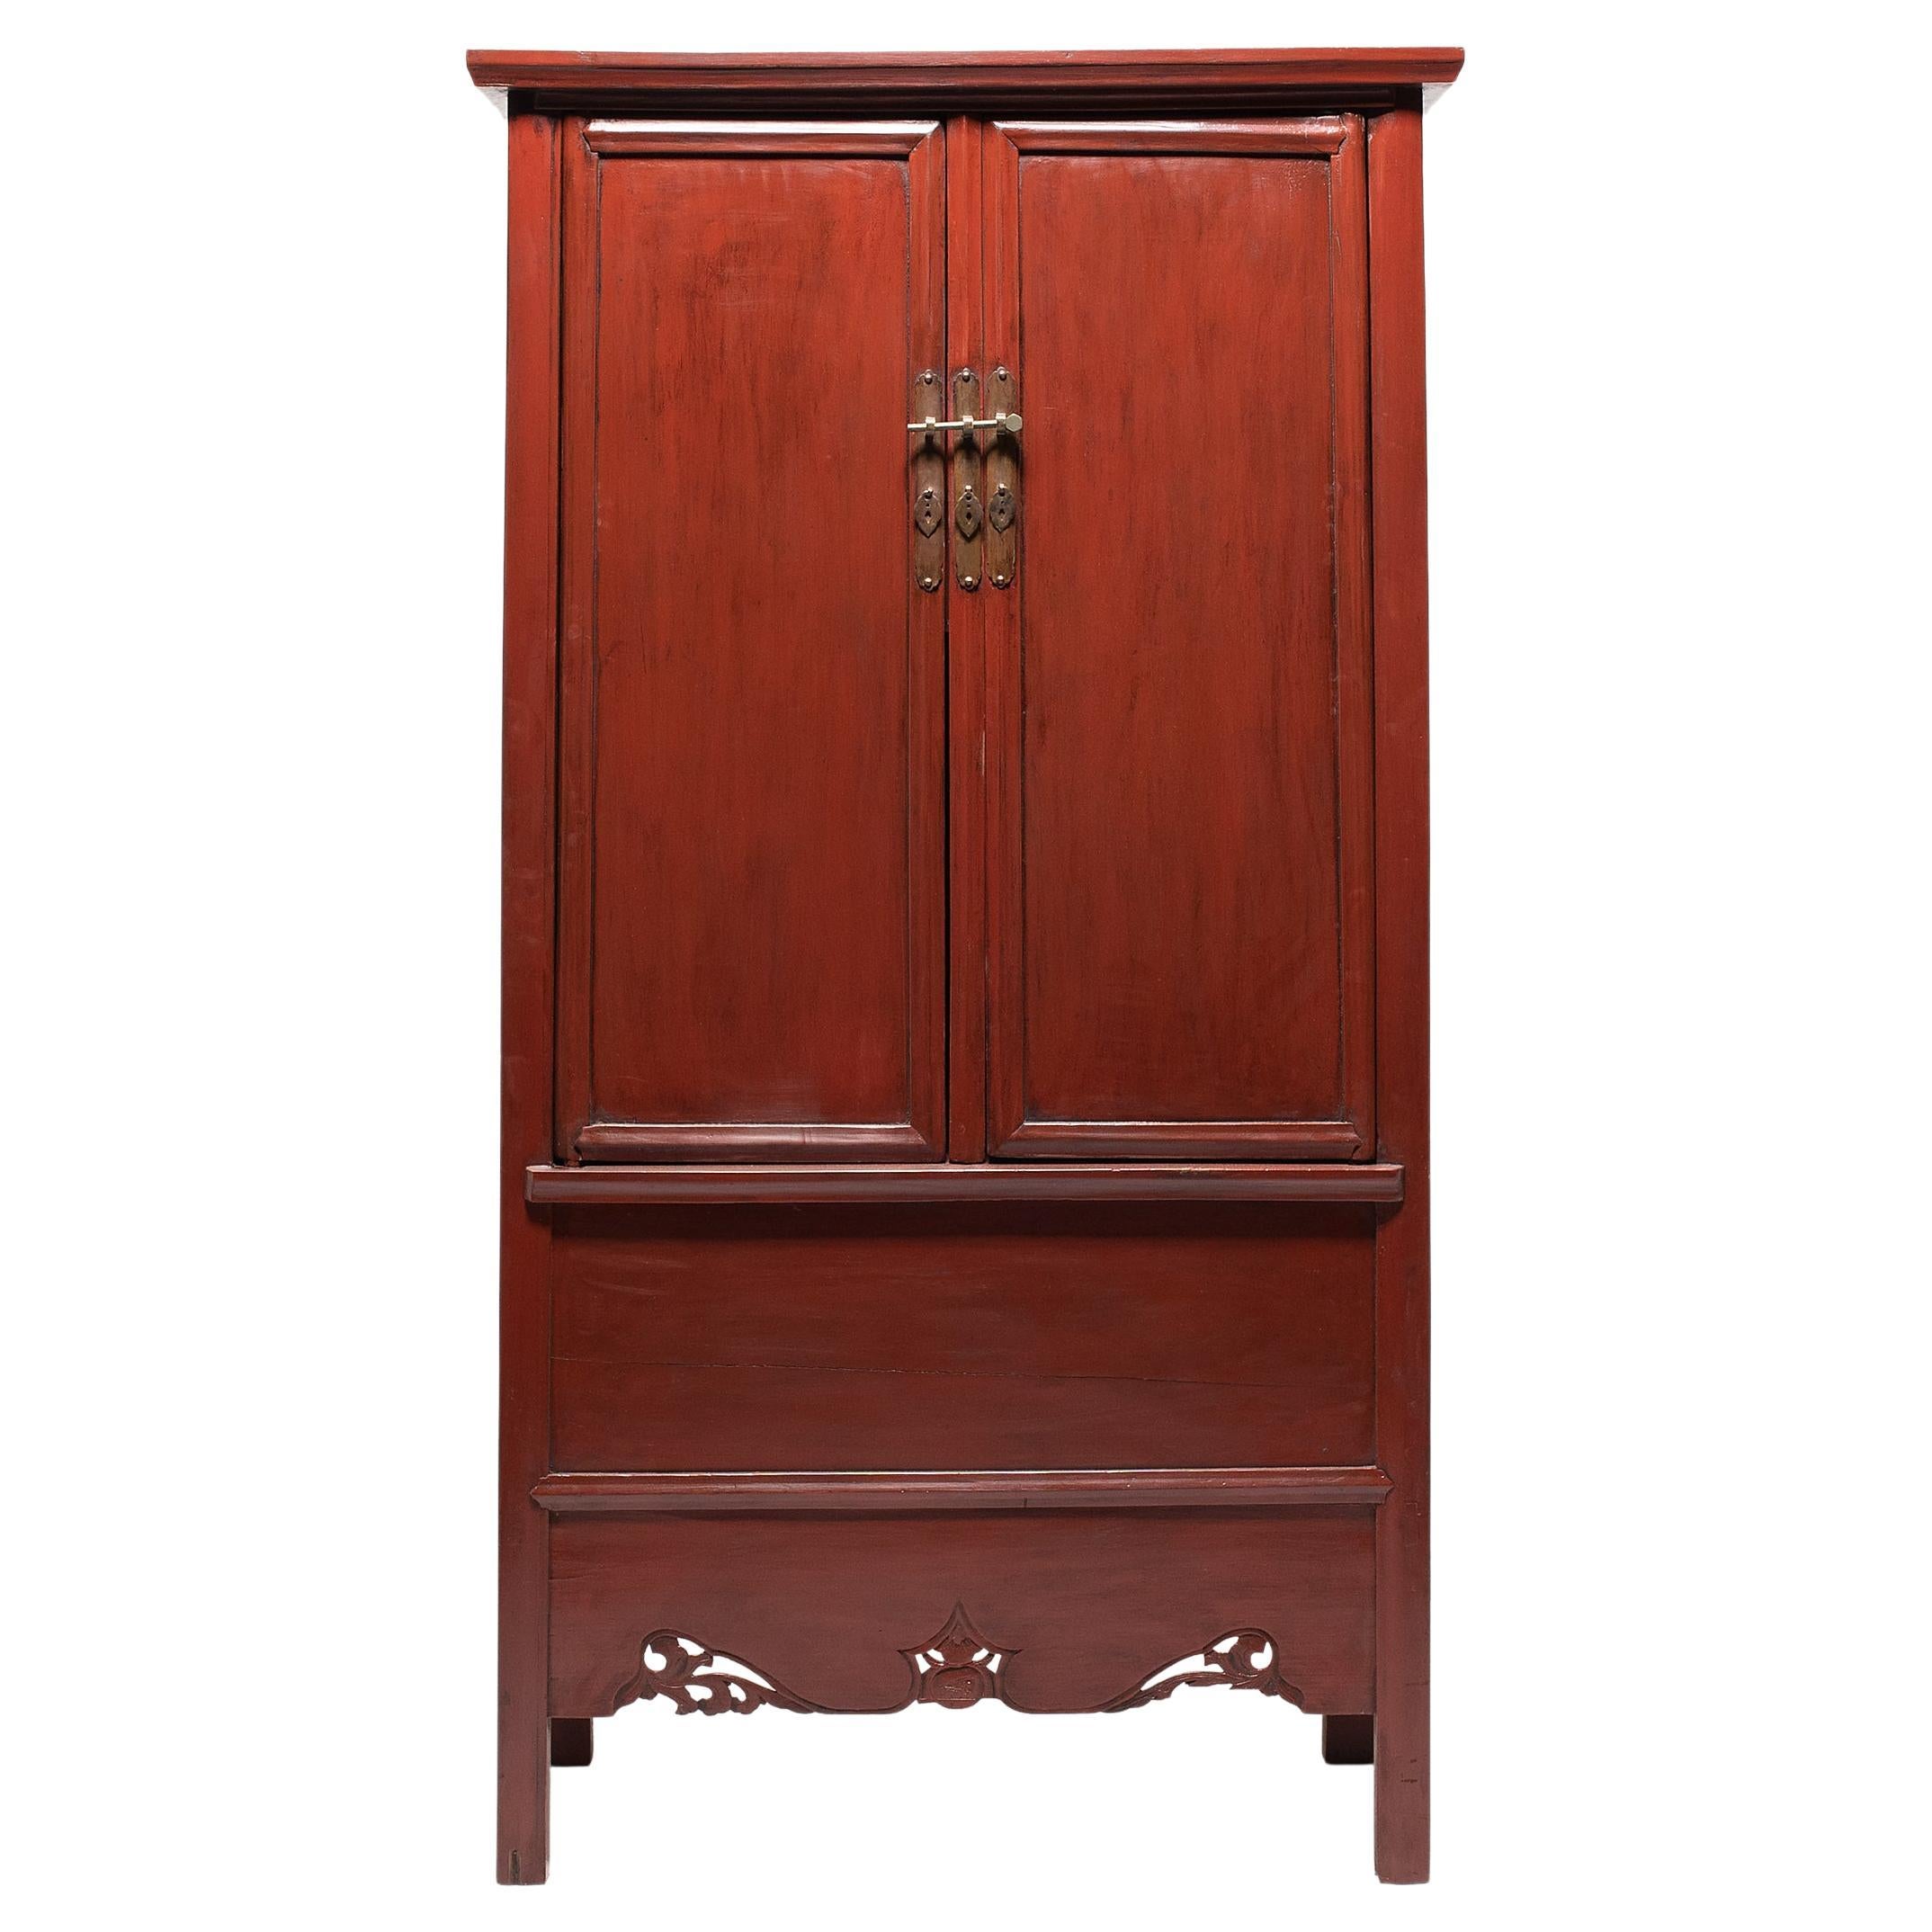 Chinese Red Lacquer Tapered Cabinet, C. 1850